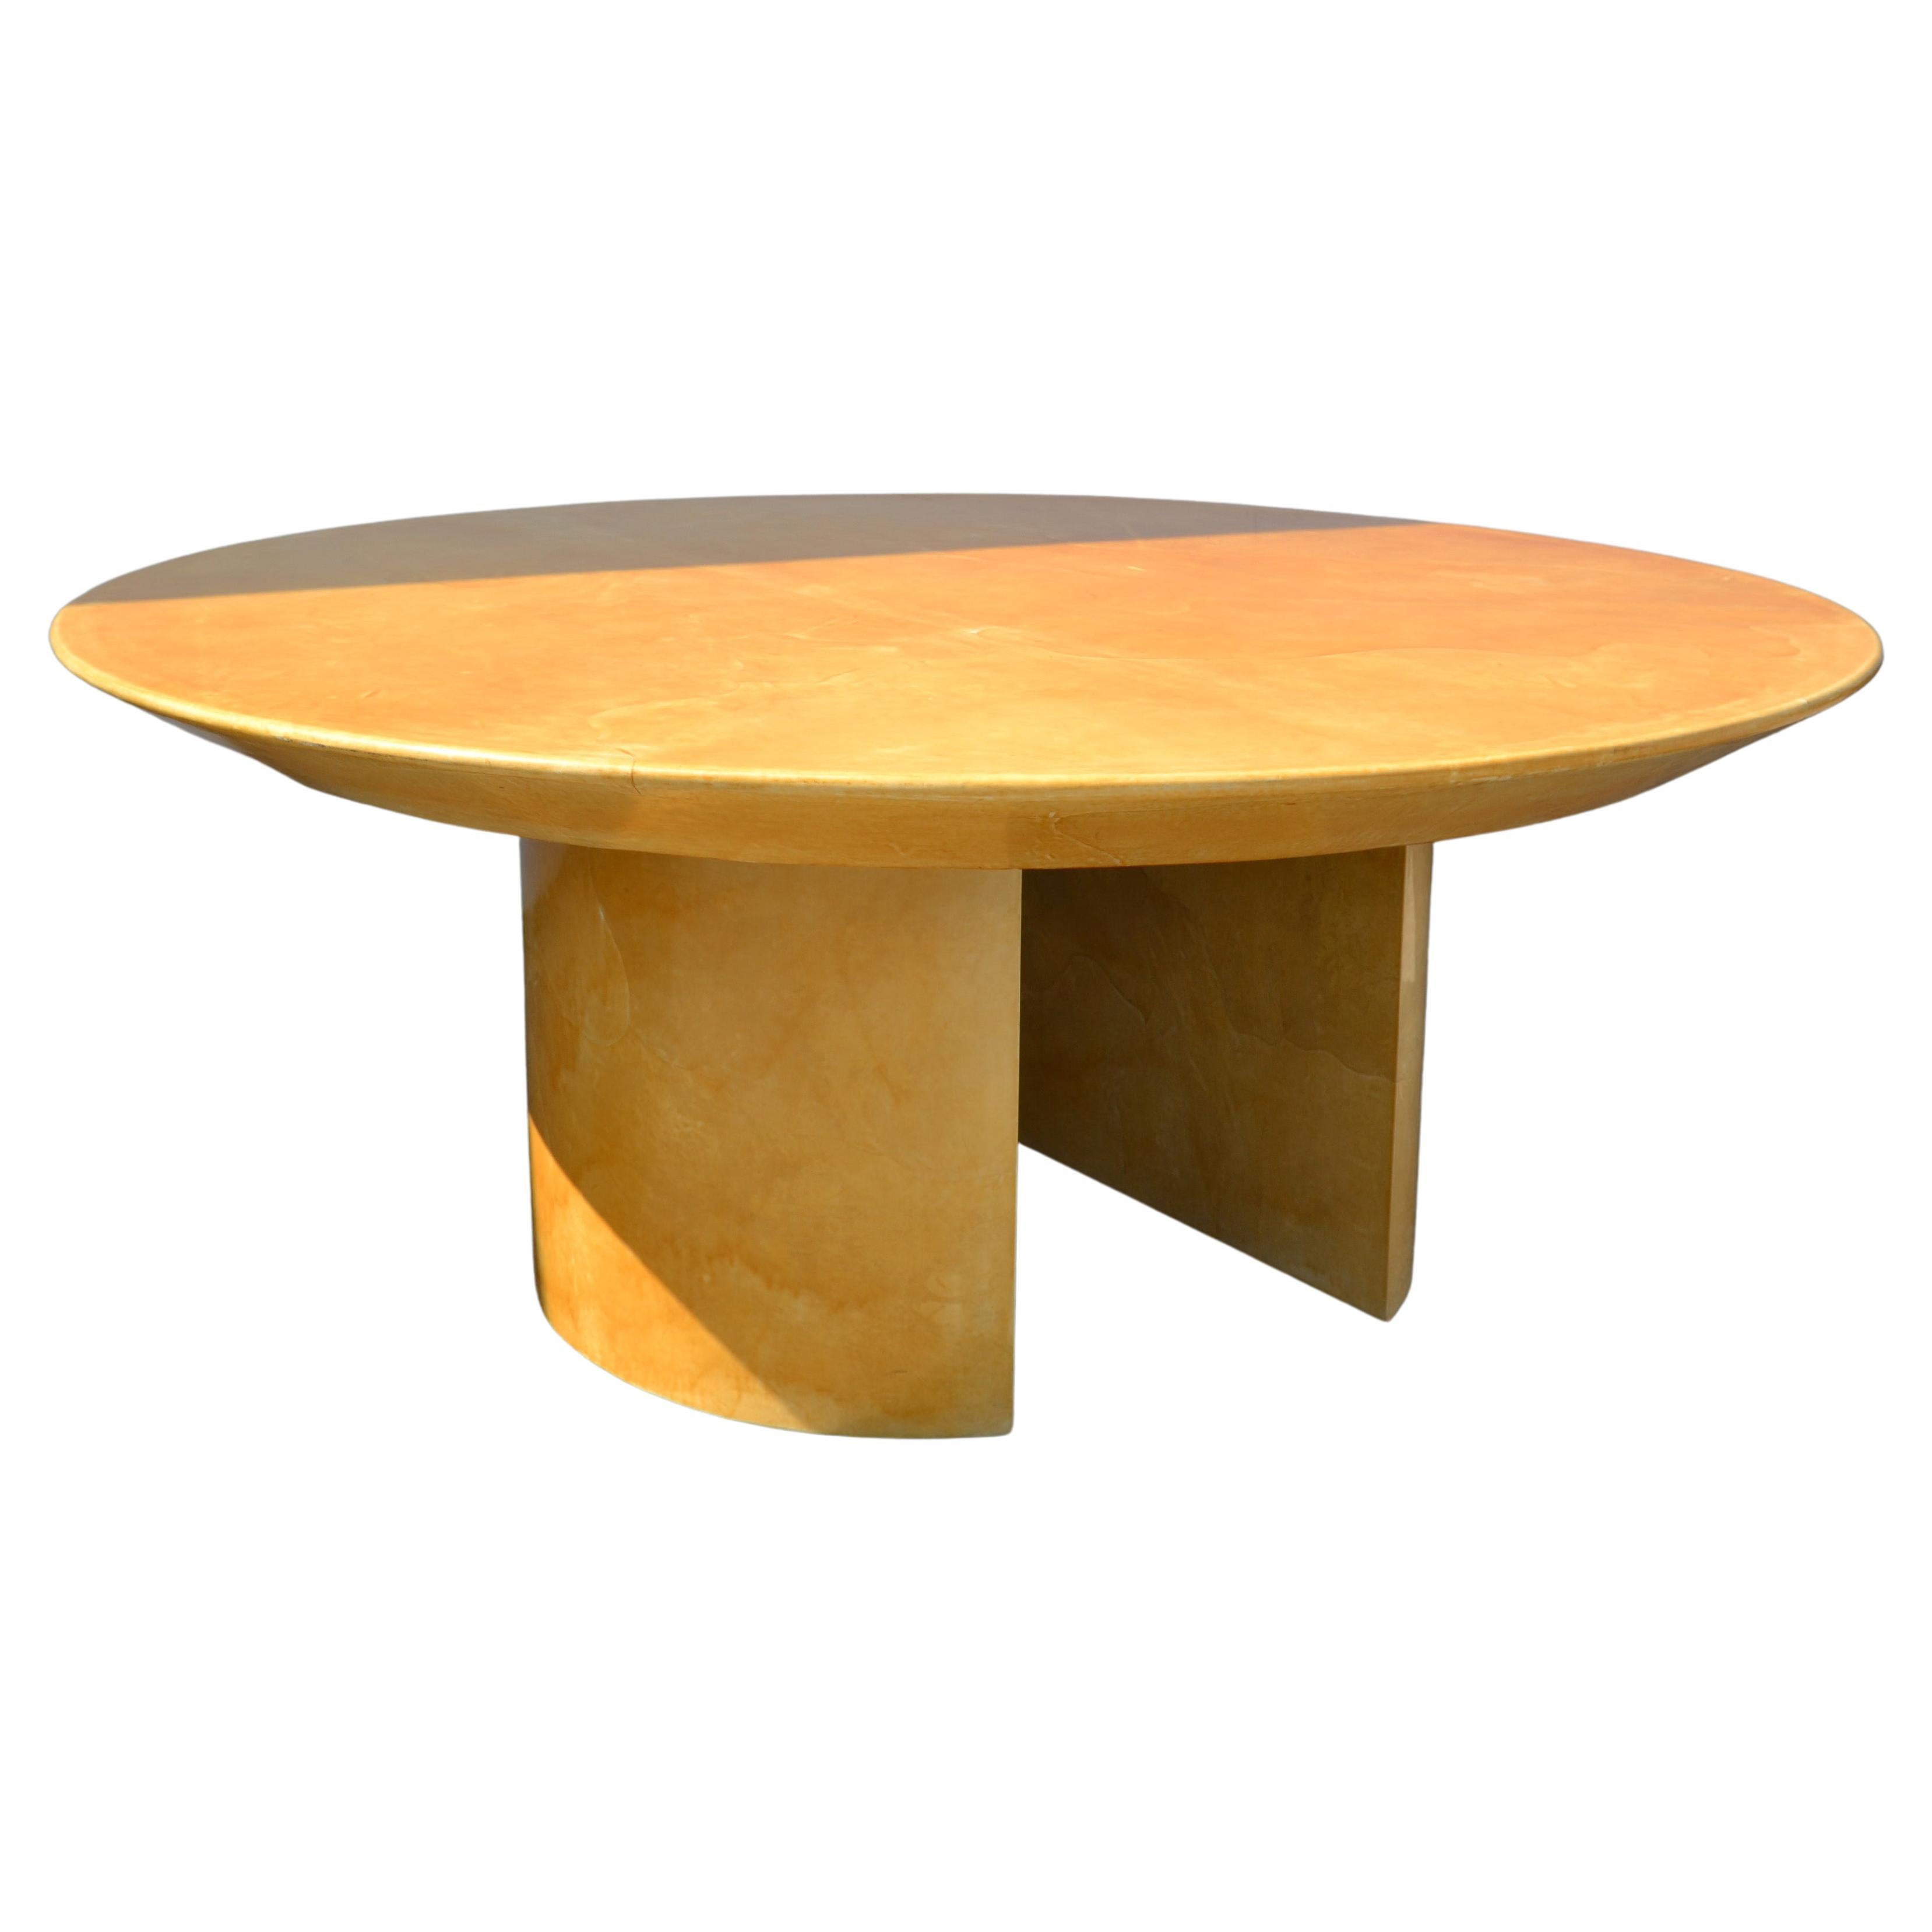 Karl Spring Mid-Century Modern Lacquered Goat Skin Dining, Conference Table 70s For Sale